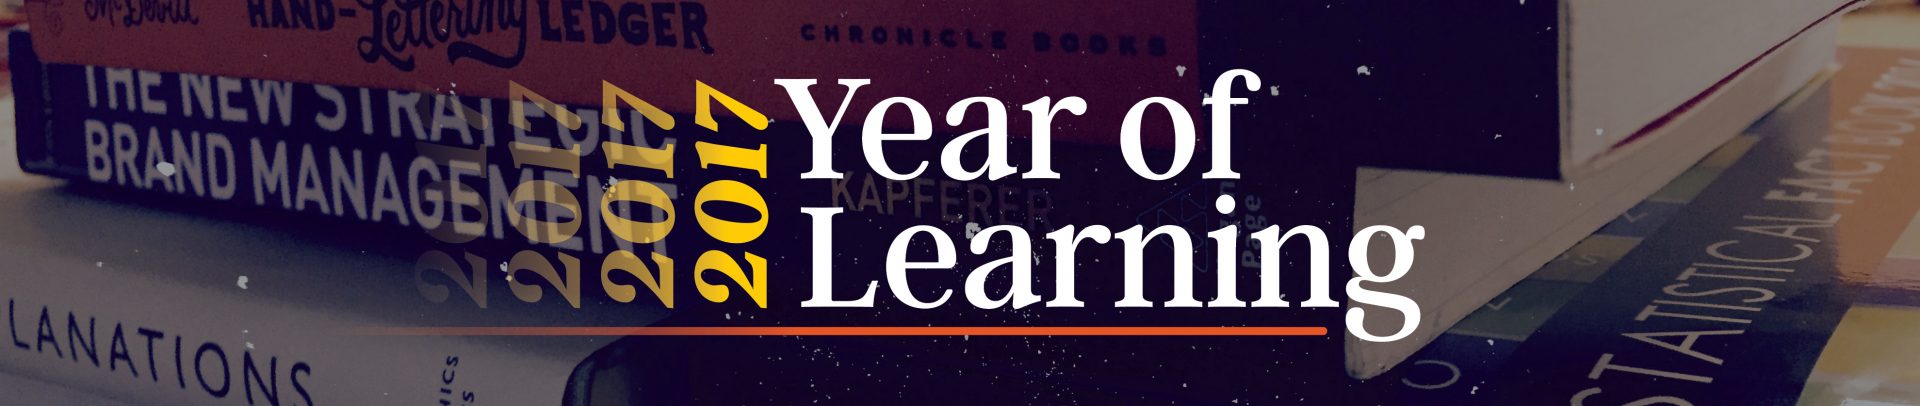 Year of Learning 2017